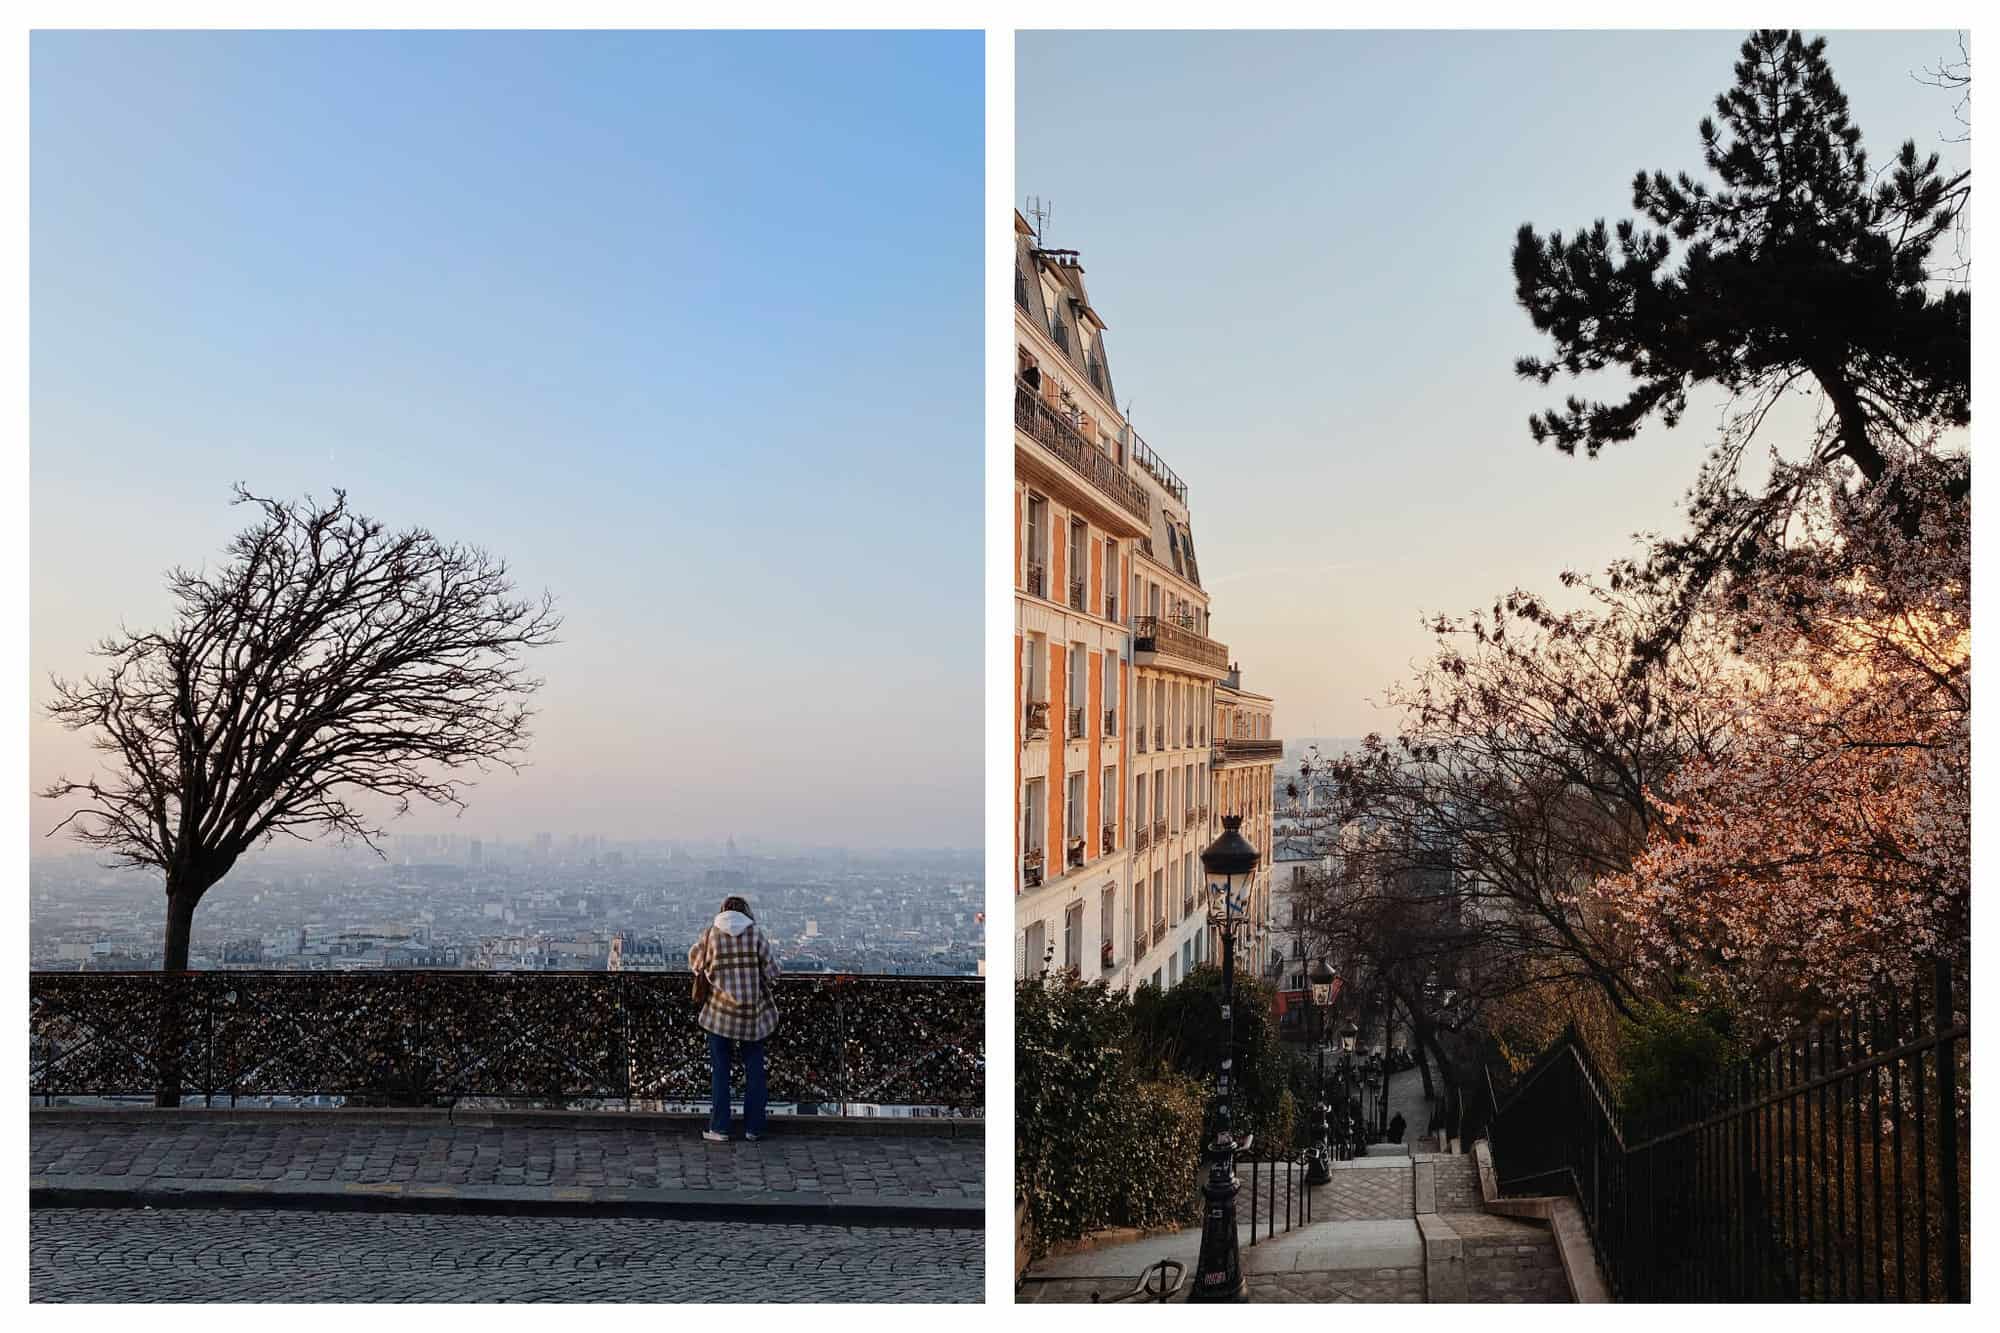 Left: The view from Montmartre. A woman stands with her back facing the camera at a viewpoint in Paris. Right: The steps up to Sacre Coeur. Looking over stairs in Montmartre, there are a variety of buildings and trees.